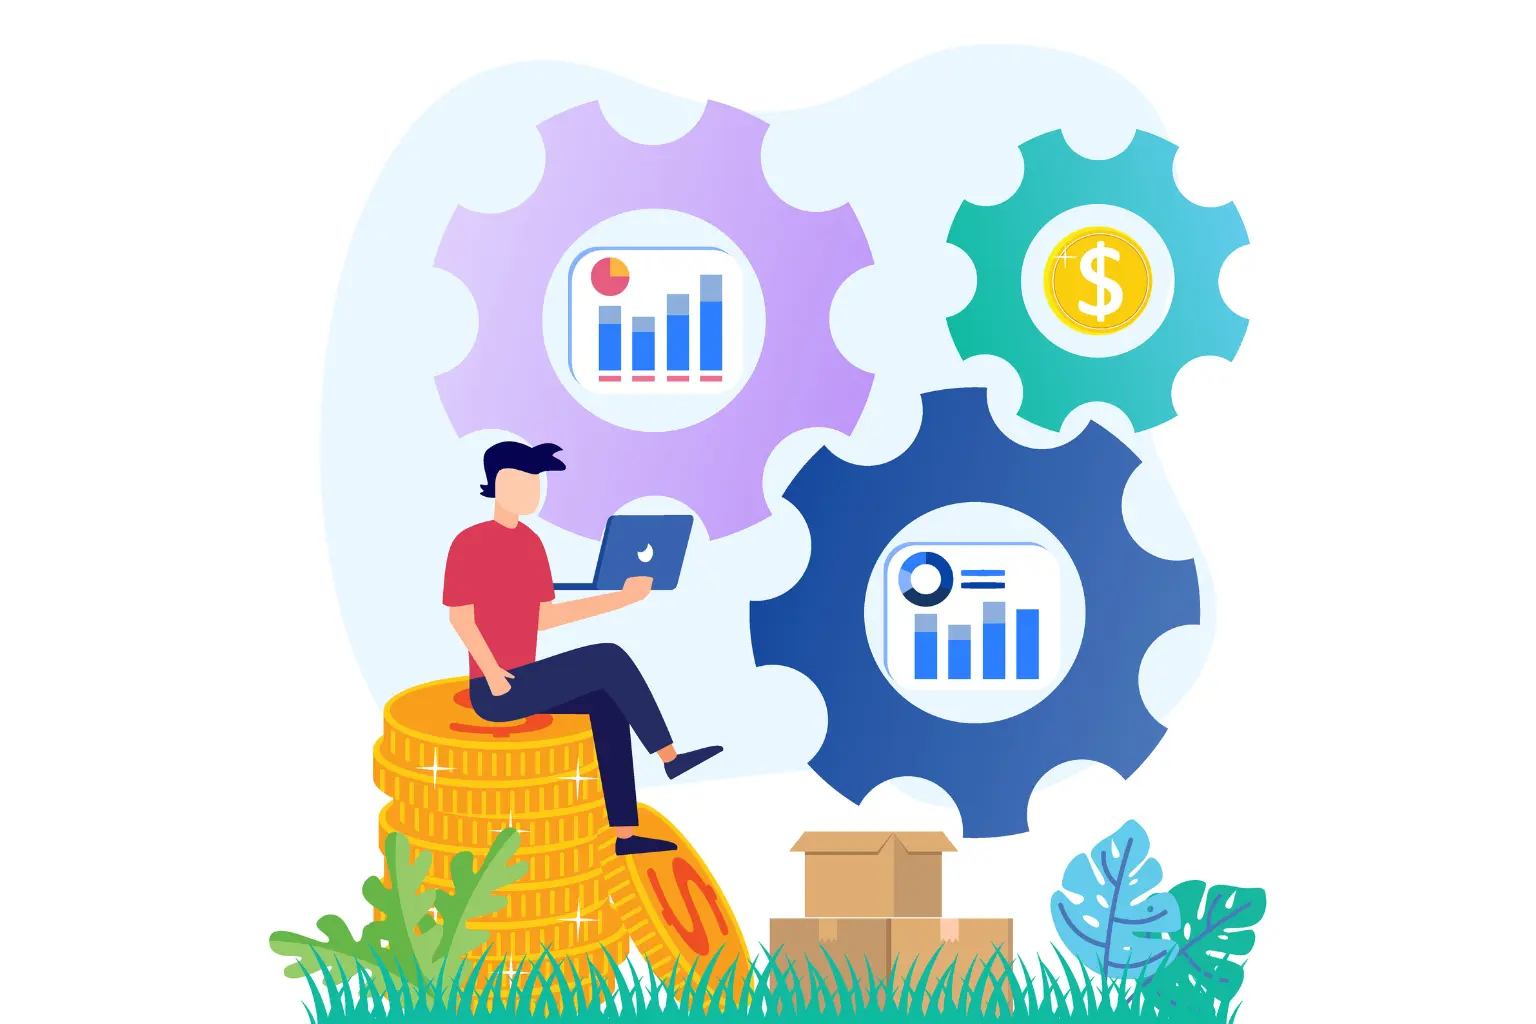  A man sitting on a stack of coins with statistics Illustration vector graphic